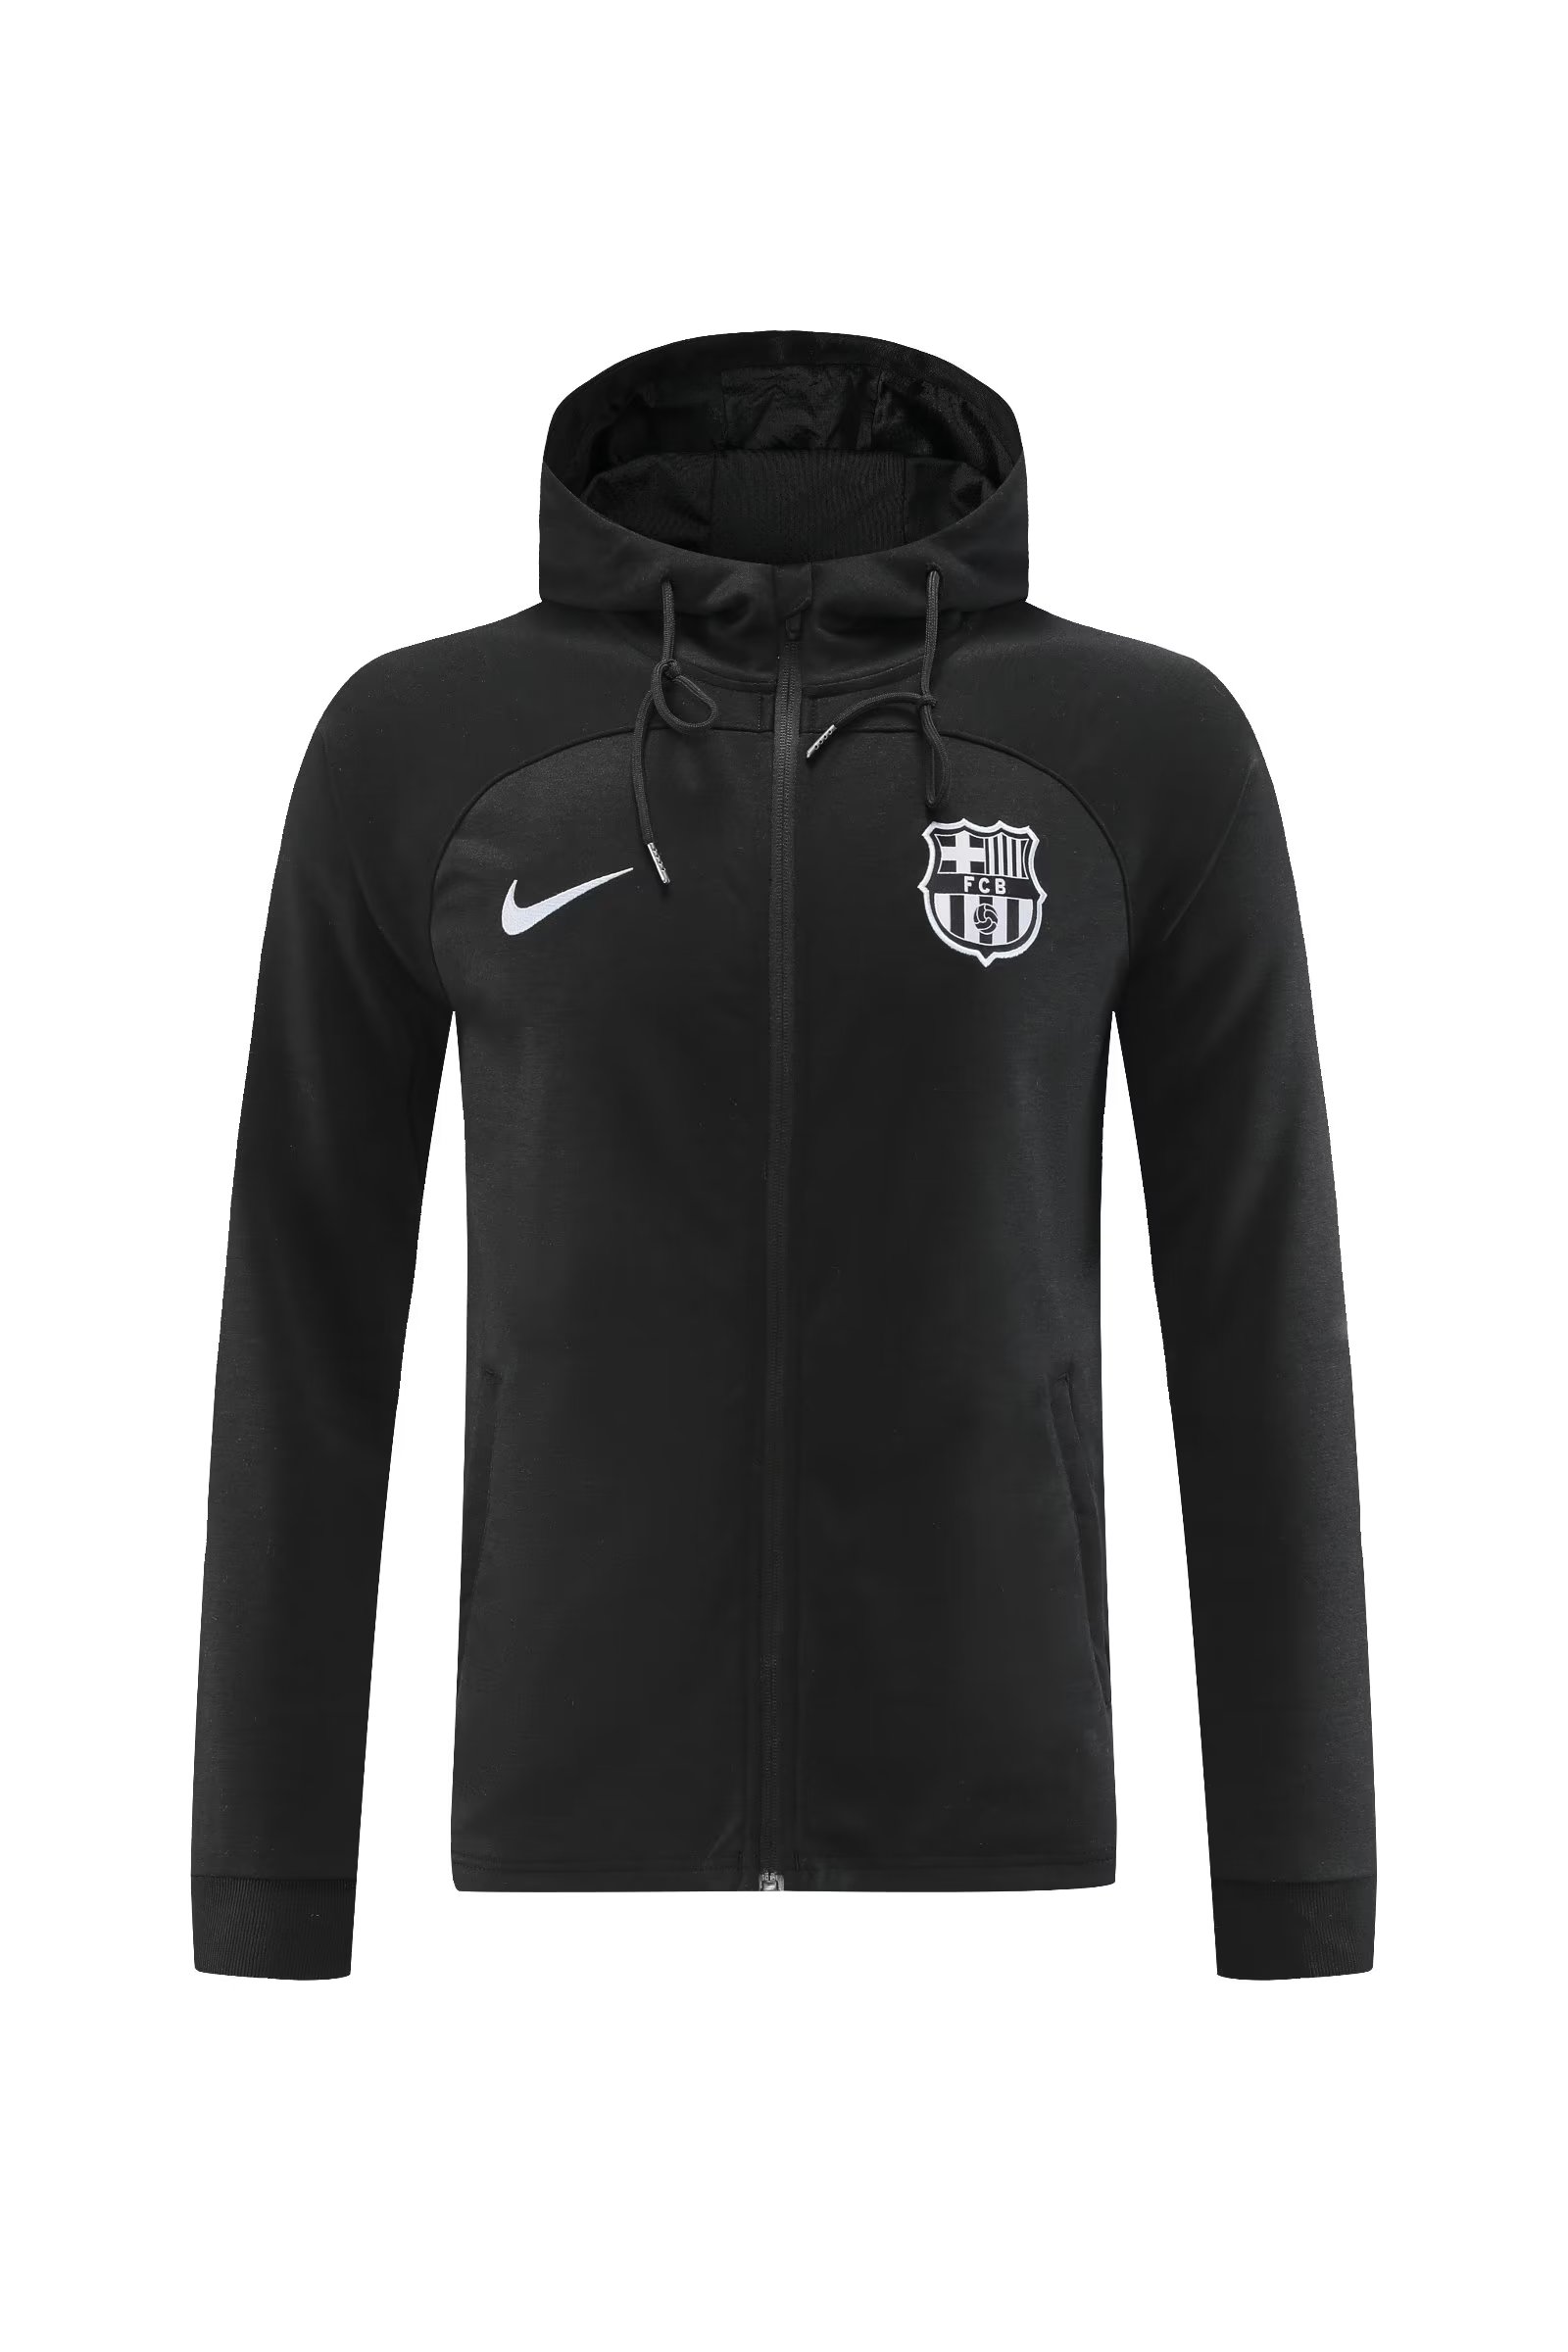 2022/23 Barcelona Black Thailand Soccer Jacket Unifrom With Hat-LH